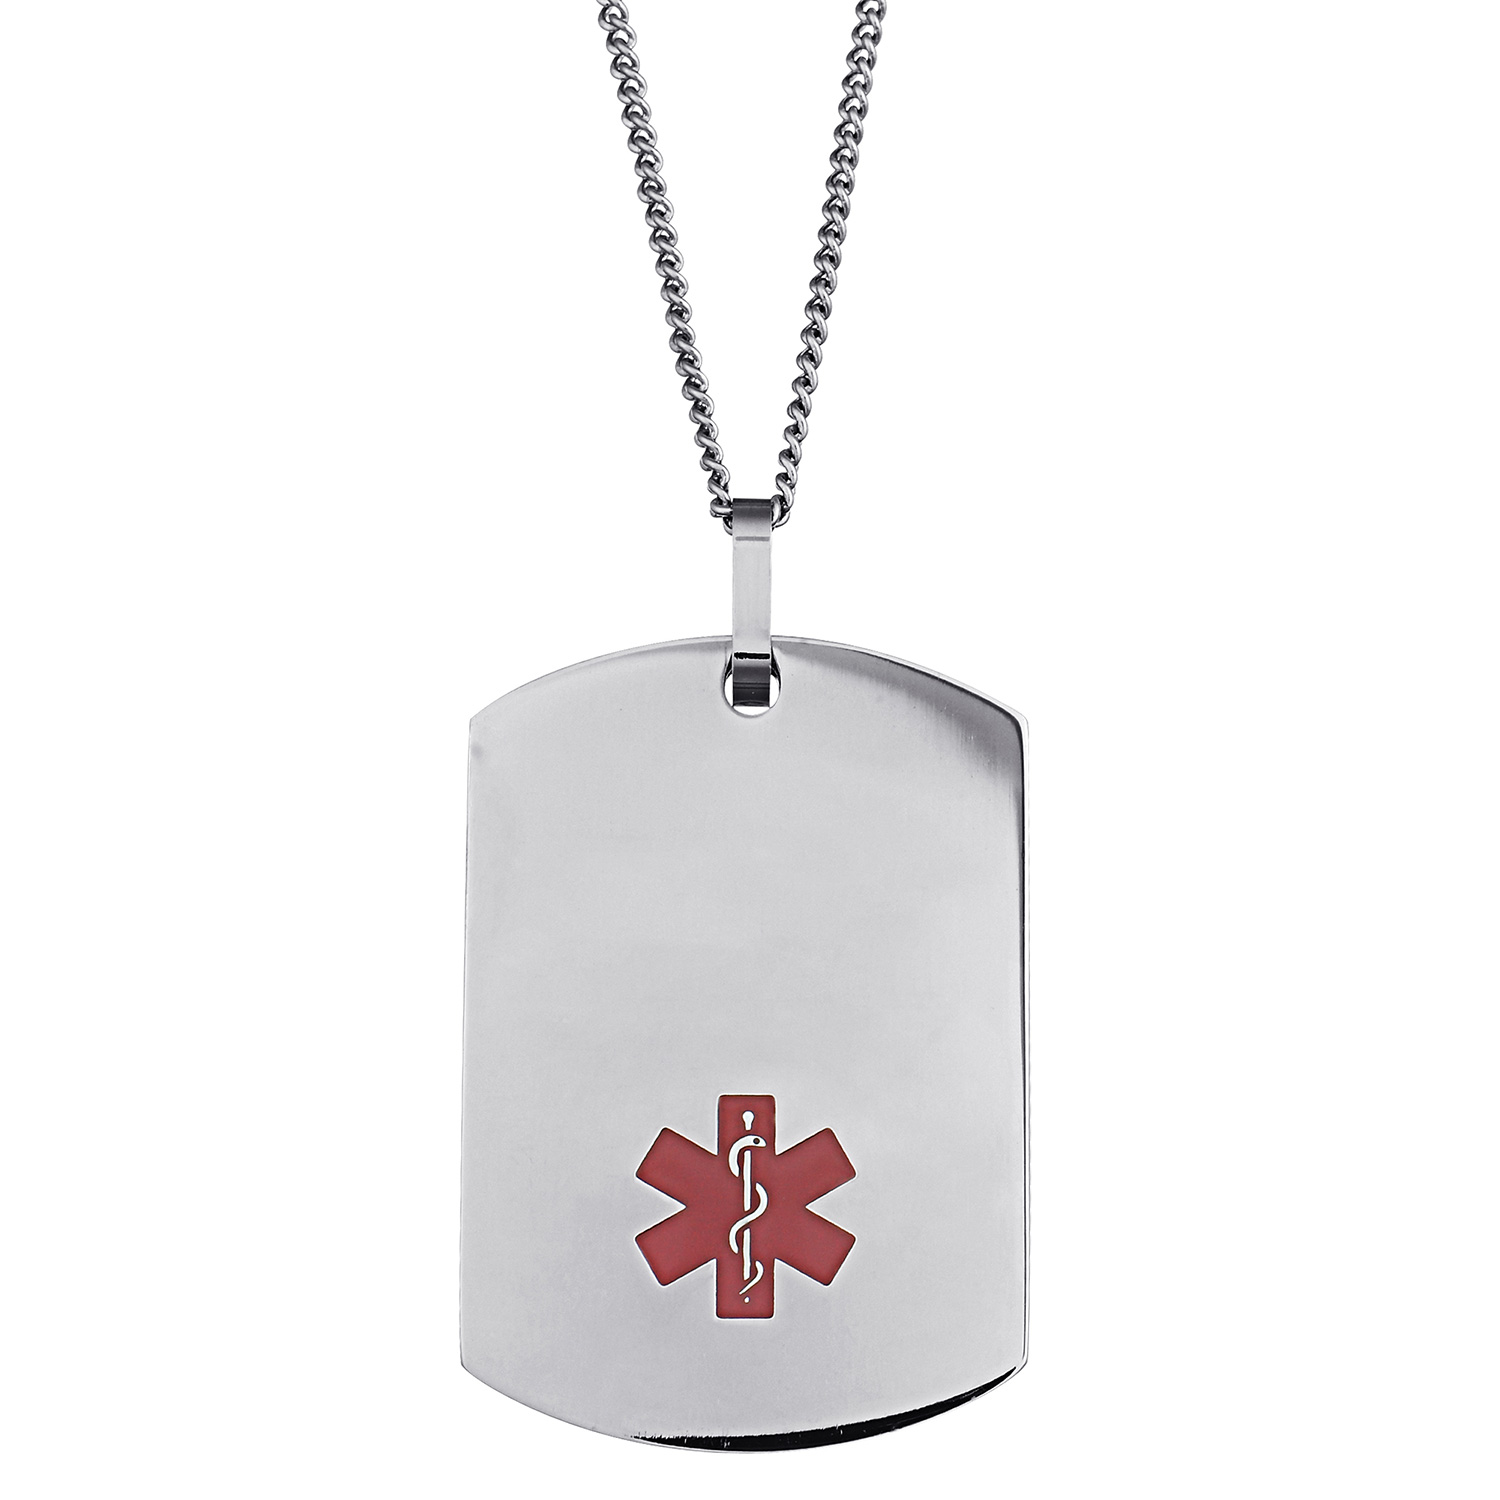 Stainless Steel Engraved Medical ID Dog Tag Necklace